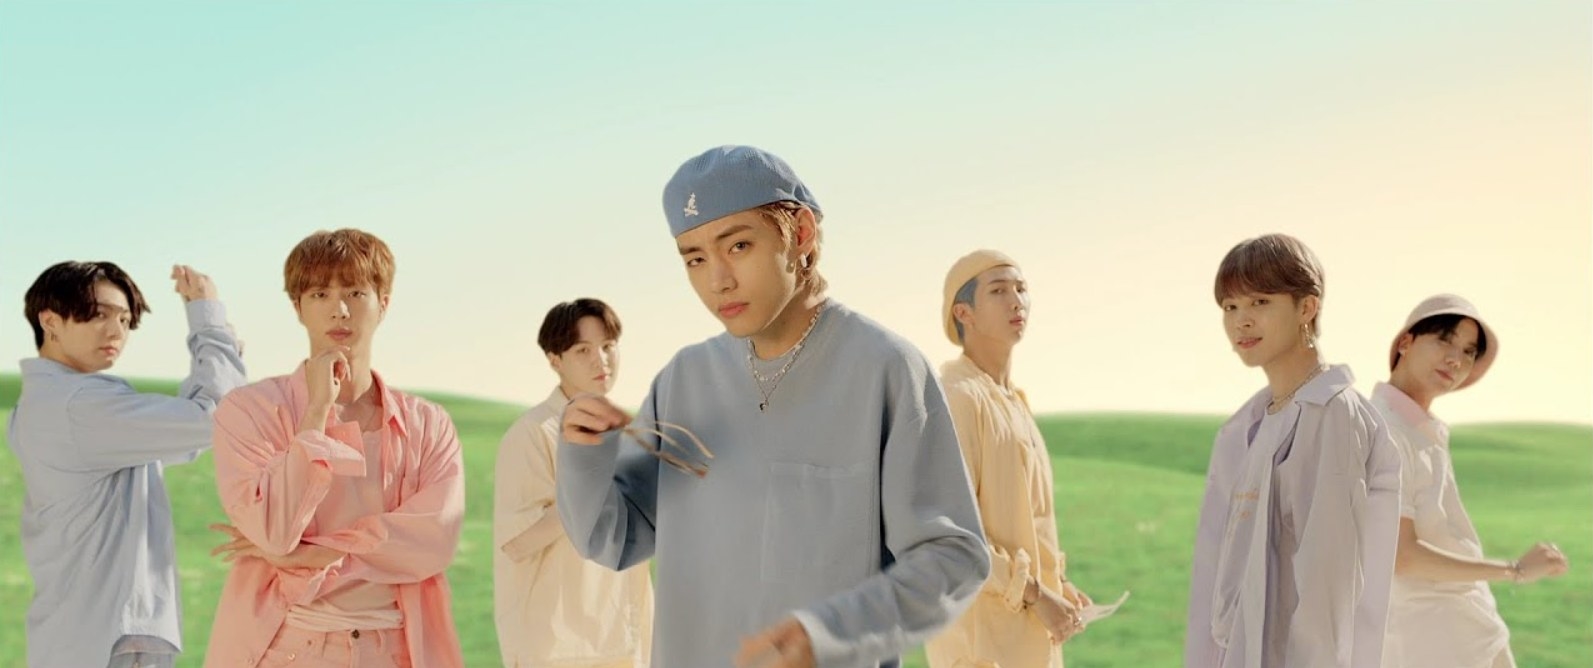 BTS wear colorful clothes and pose in a field in the Dynamite music video